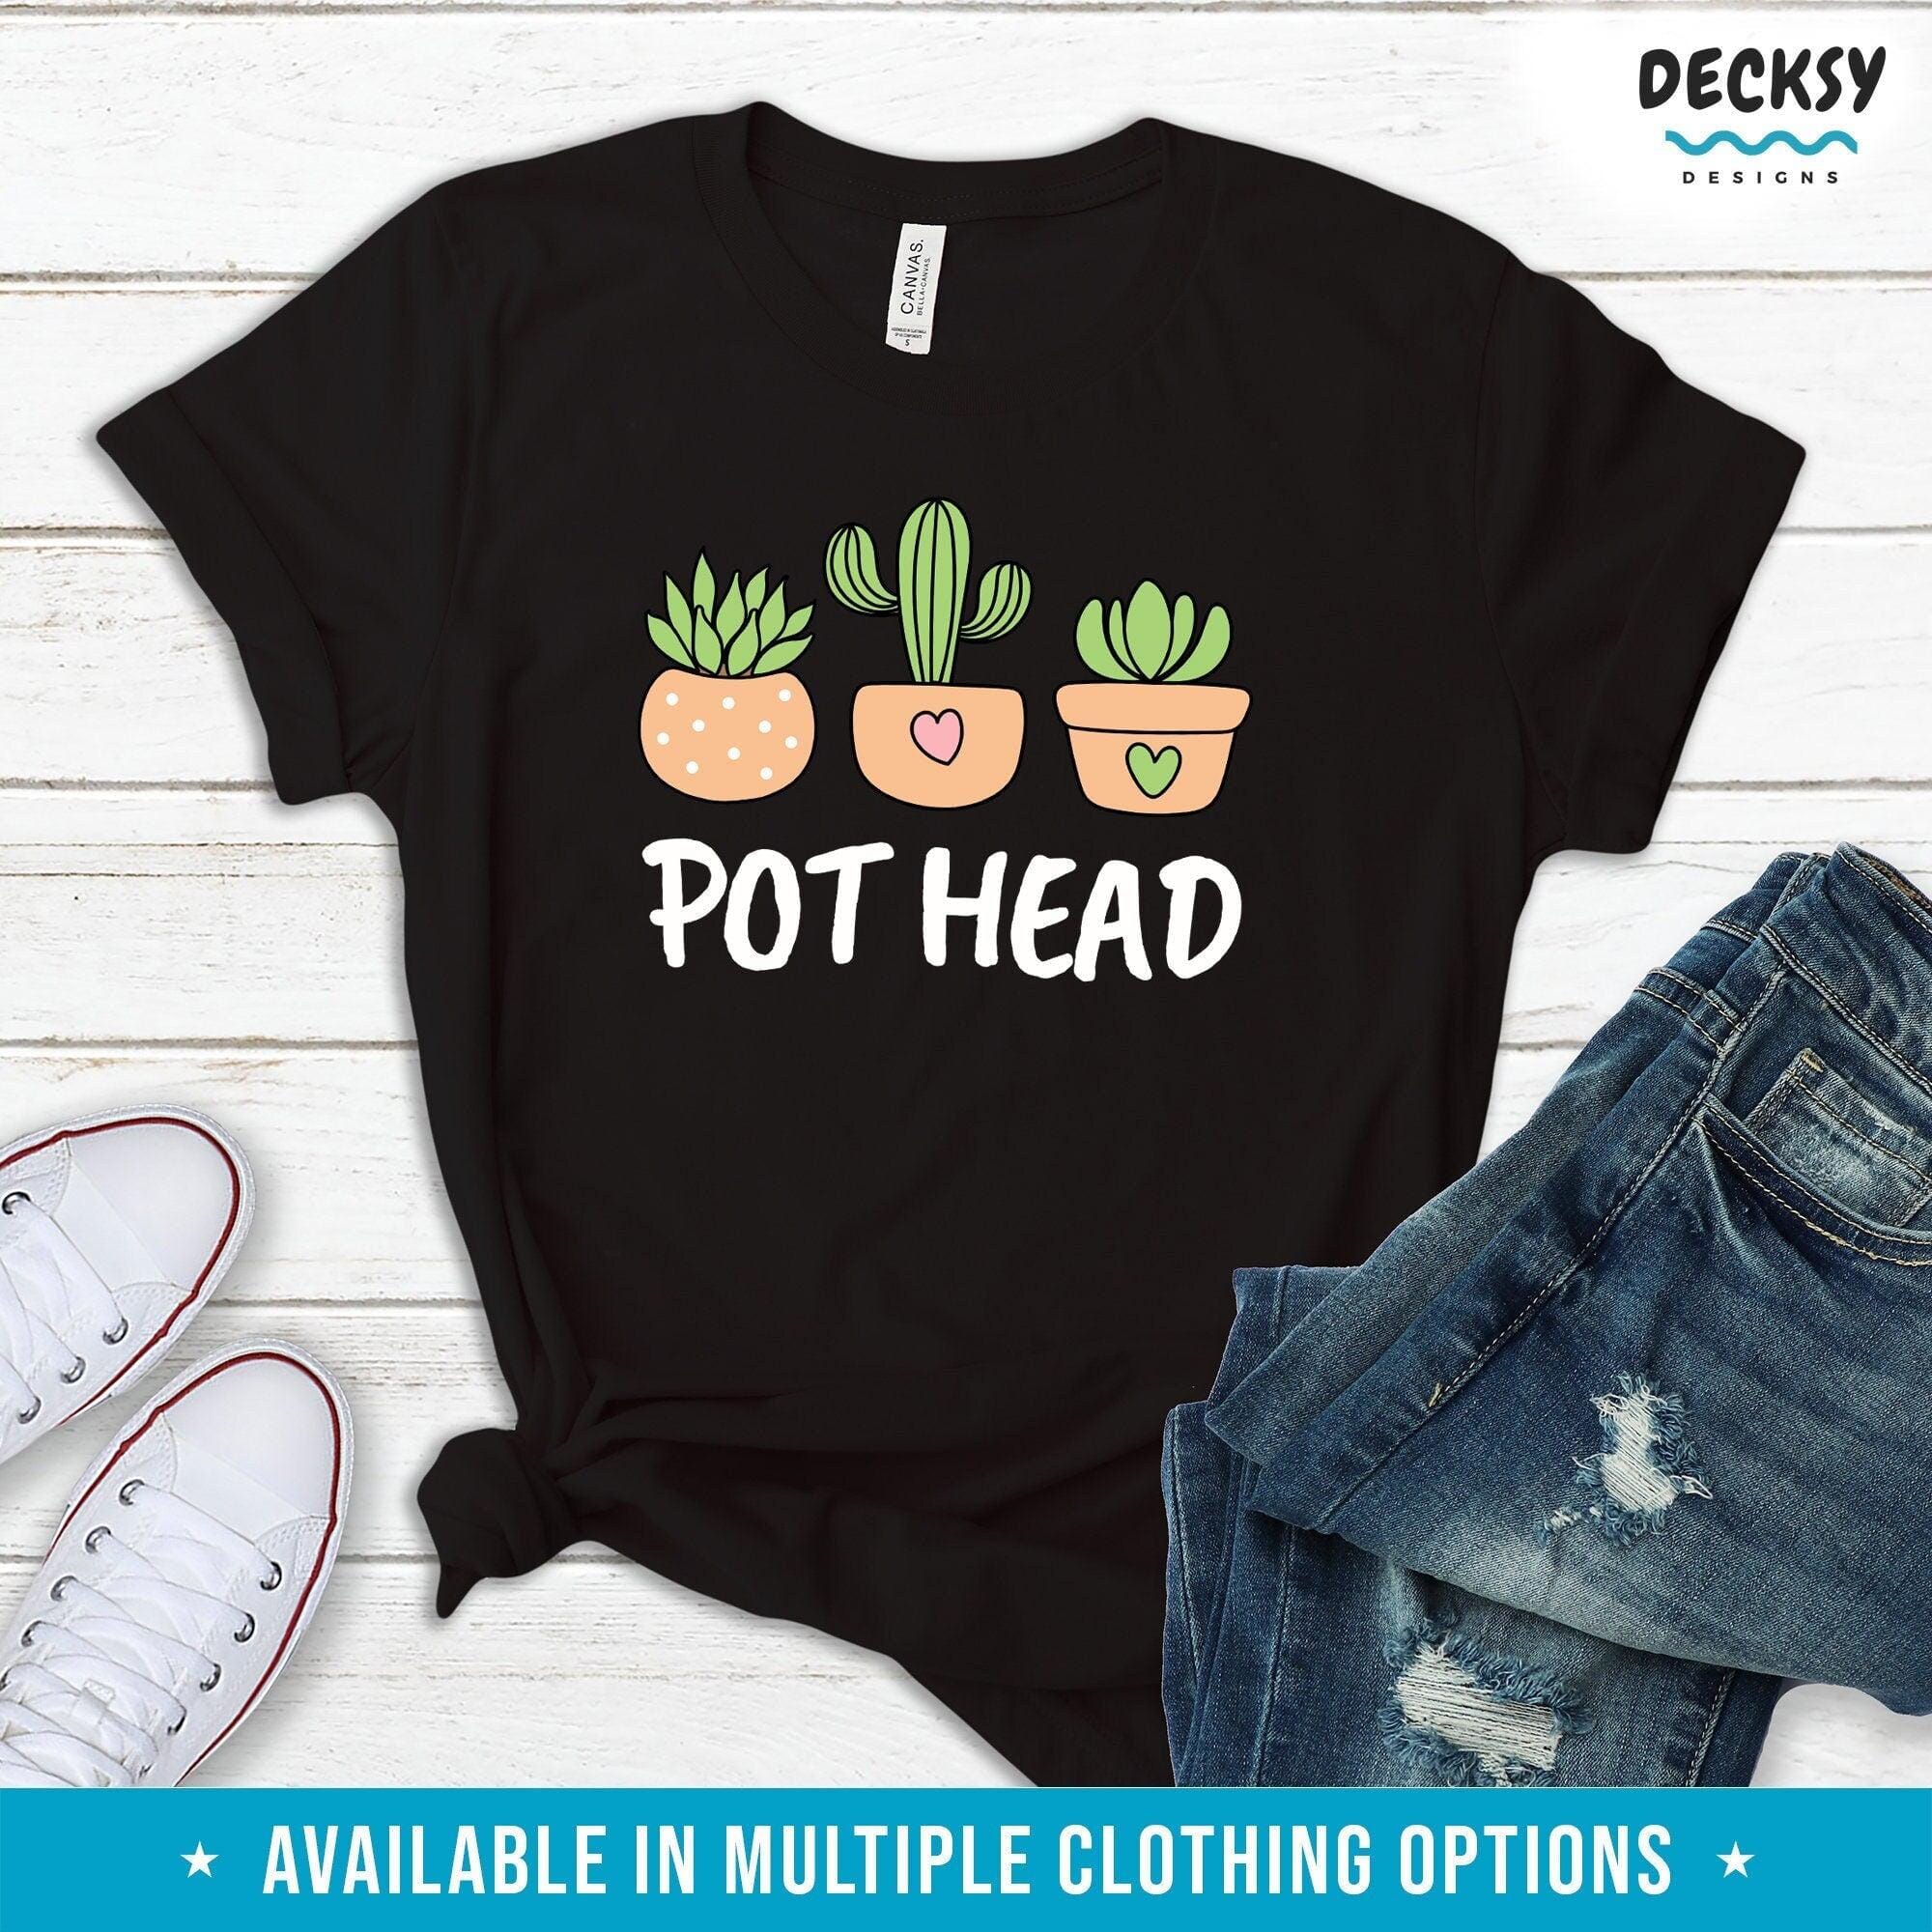 Gardening Shirt, Gift for Gardener-Clothing:Gender-Neutral Adult Clothing:Tops & Tees:T-shirts:Graphic Tees-DecksyDesigns